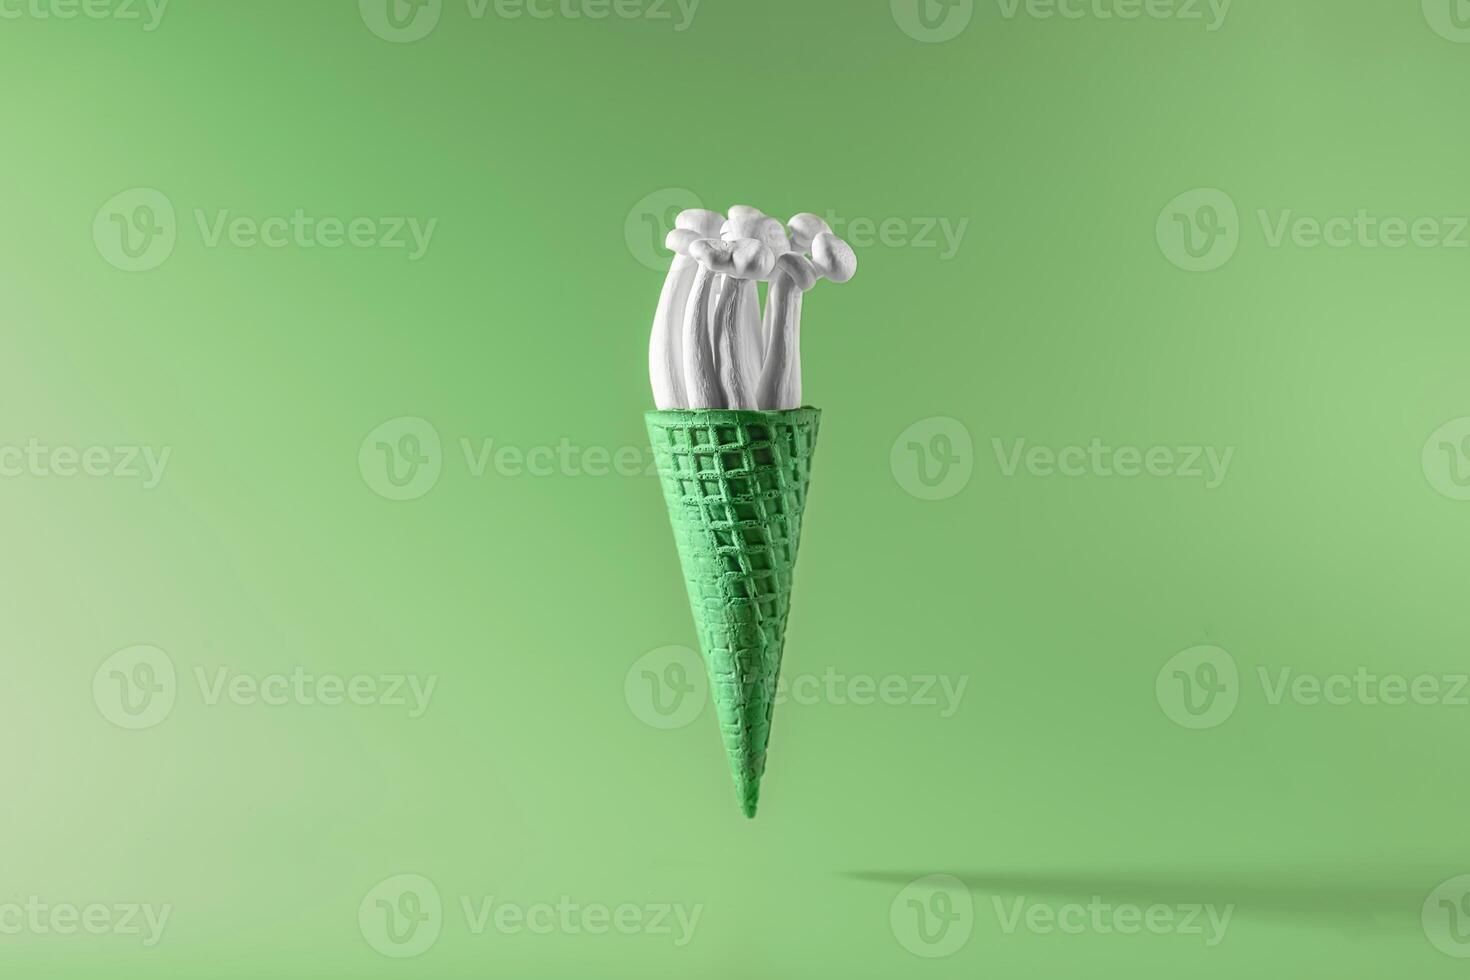 shimeji mushrooms with green moss in green ice cream cone, on green background photo